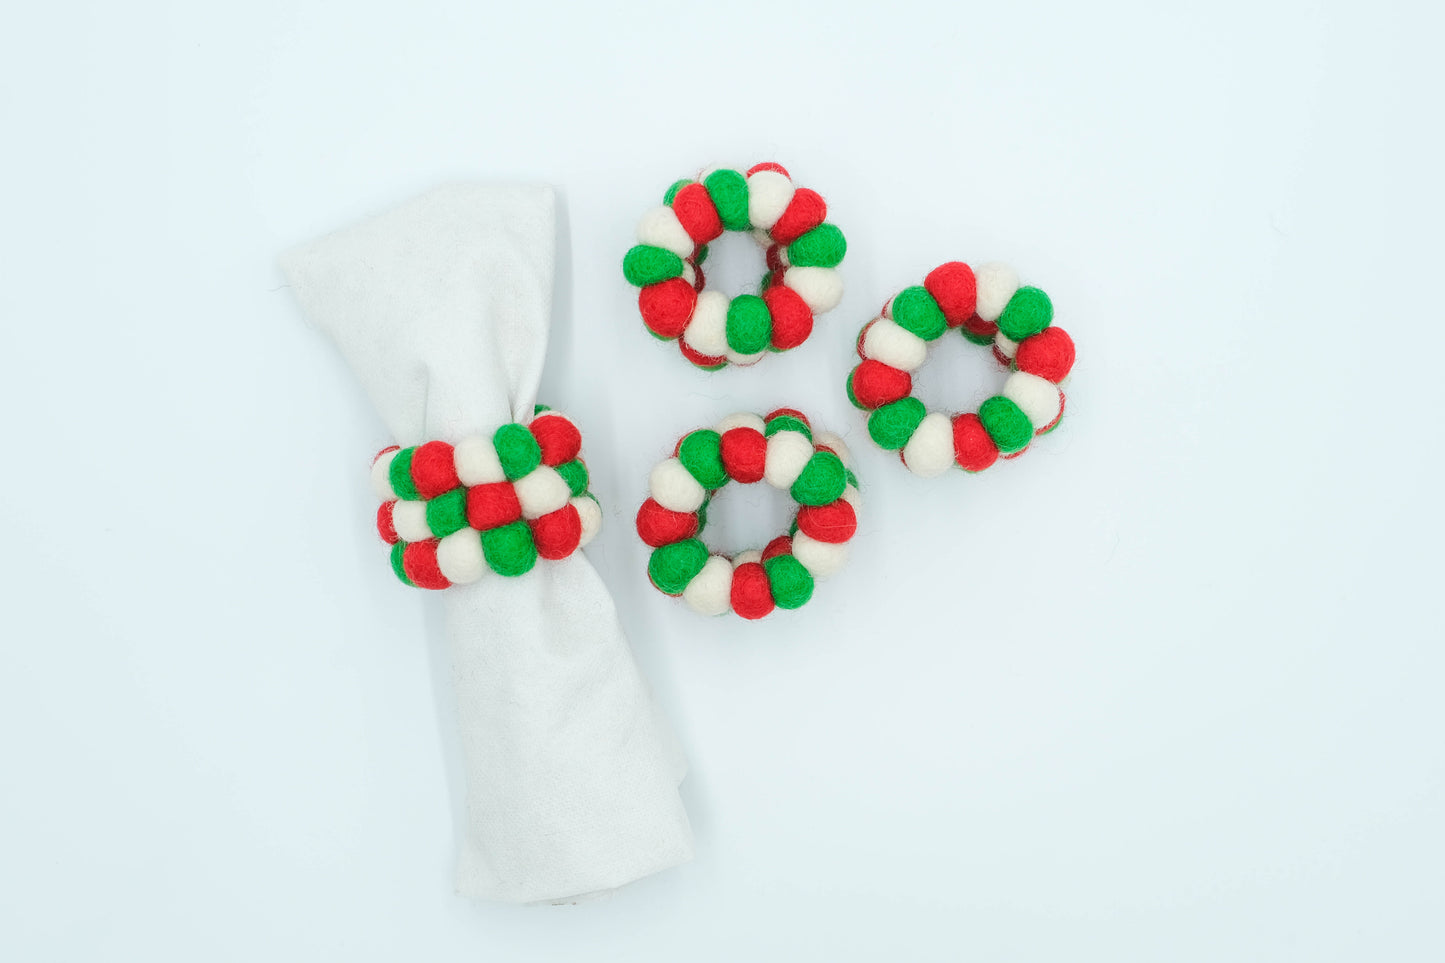 This Global Groove Life, handmade, ethical, fair trade, eco-friendly, sustainable, felt red, white and green Napkin Ring set was created by artisans in Kathmandu Nepal and will bring colorful warmth and functionality to your table top.